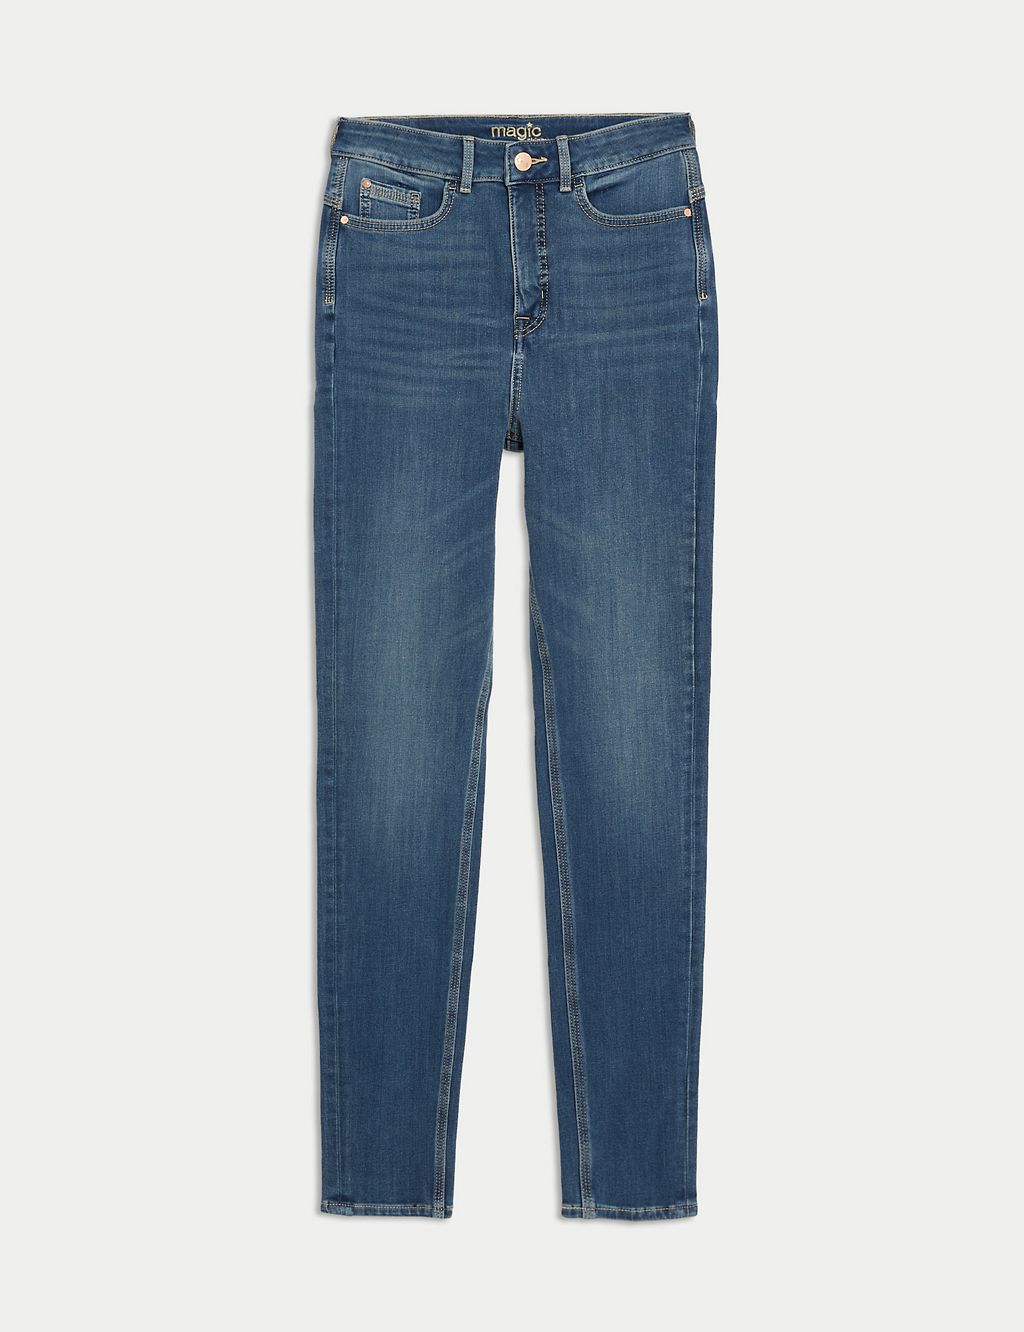 Magic Shaping High Waisted Skinny Jeans 1 of 6